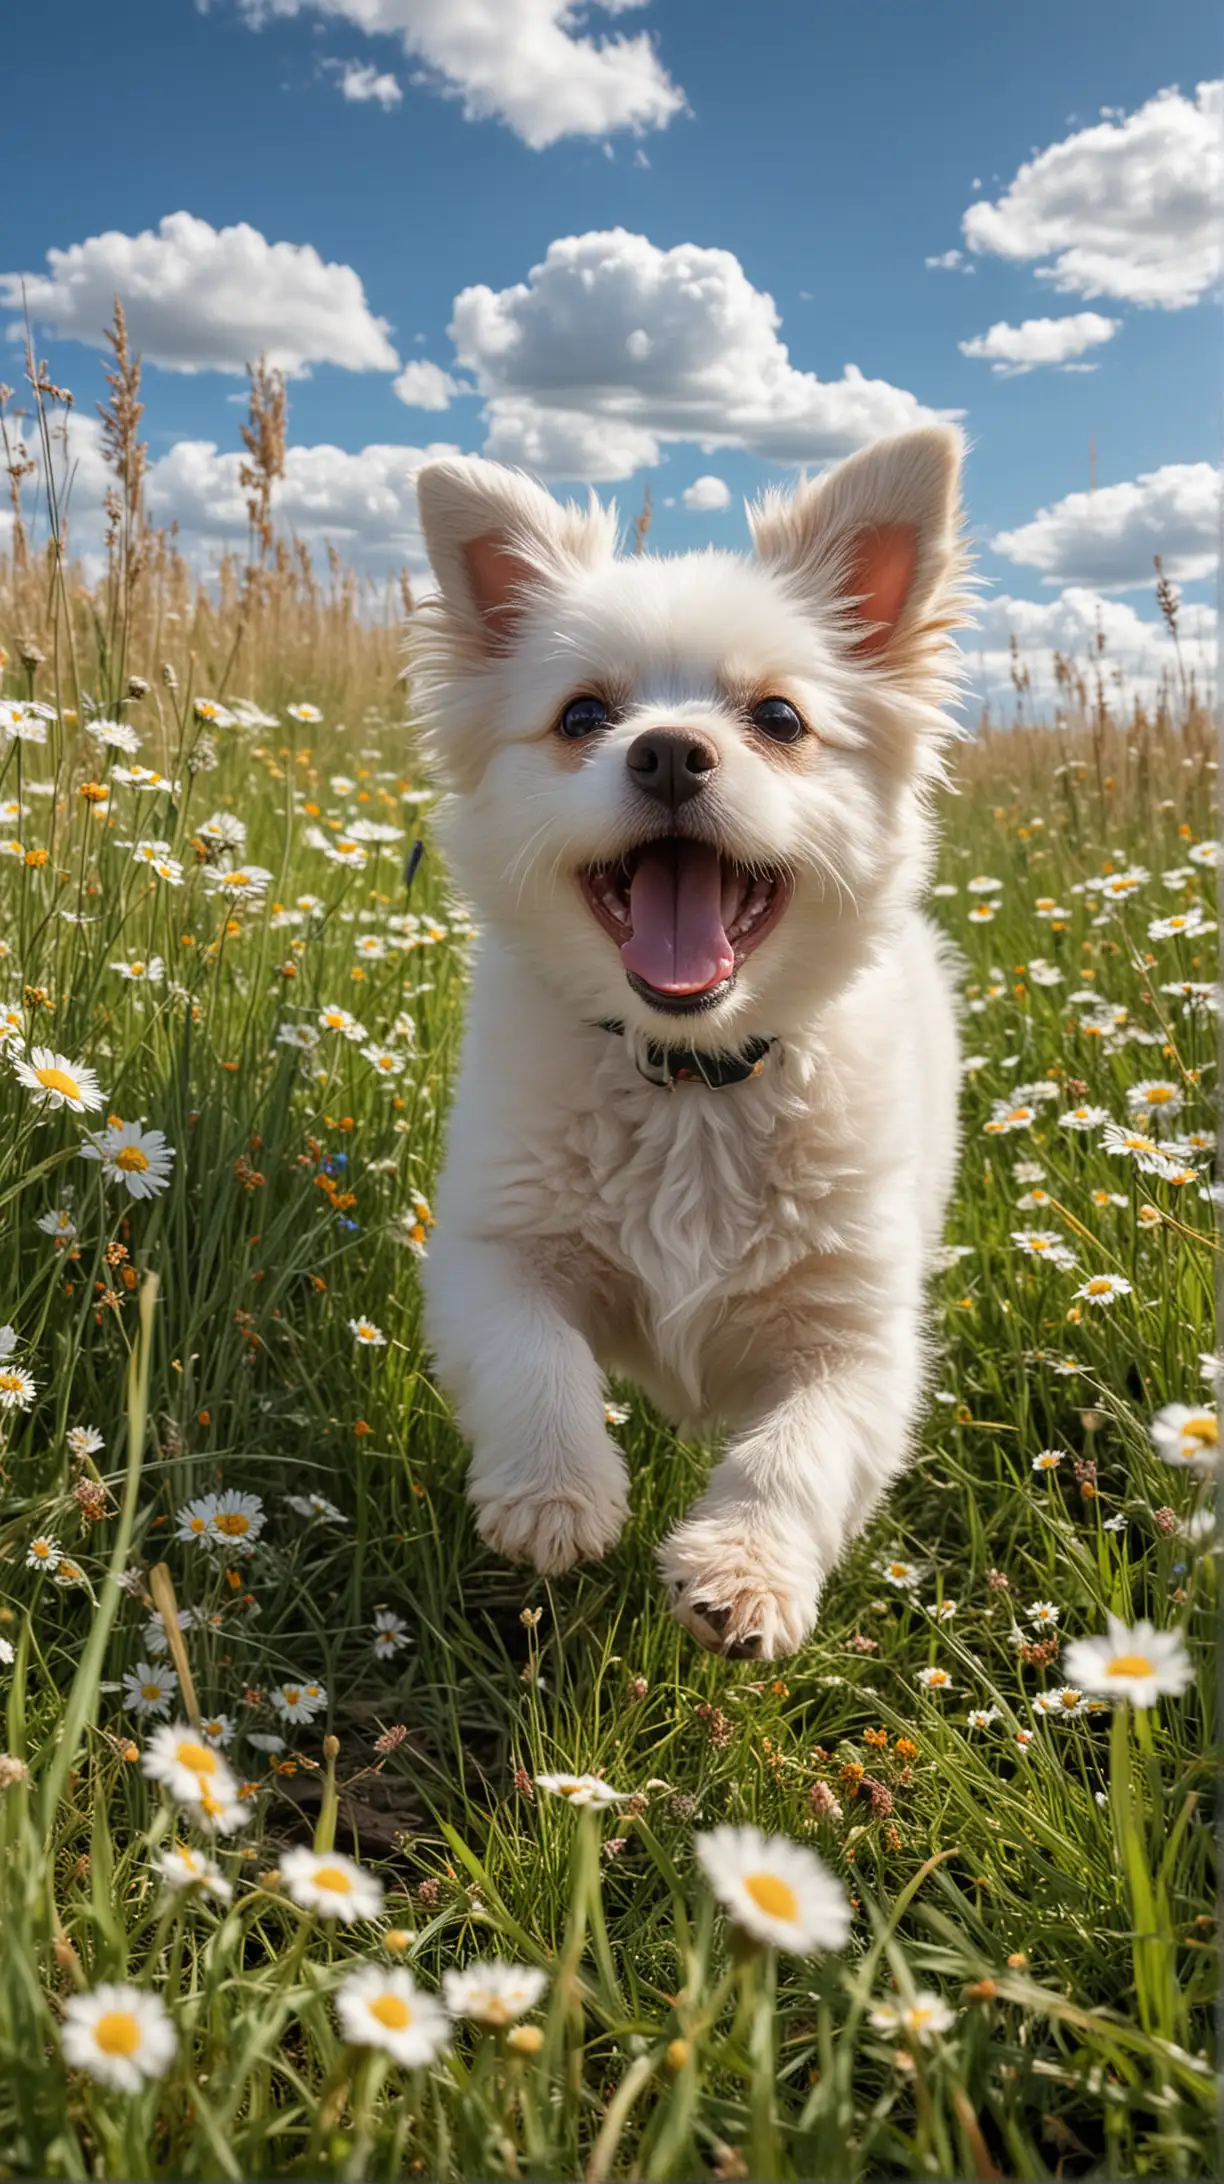 a small, fluffy dog with predominantly white fur and some light brown patches, joyfully running through a field of grass and flowers. The young puppy’s tongue is out, and its ears are perked up, suggesting a sense of freedom and playfulness. The background features a sunny blue sky with clouds, creating a pleasant and uplifting scene